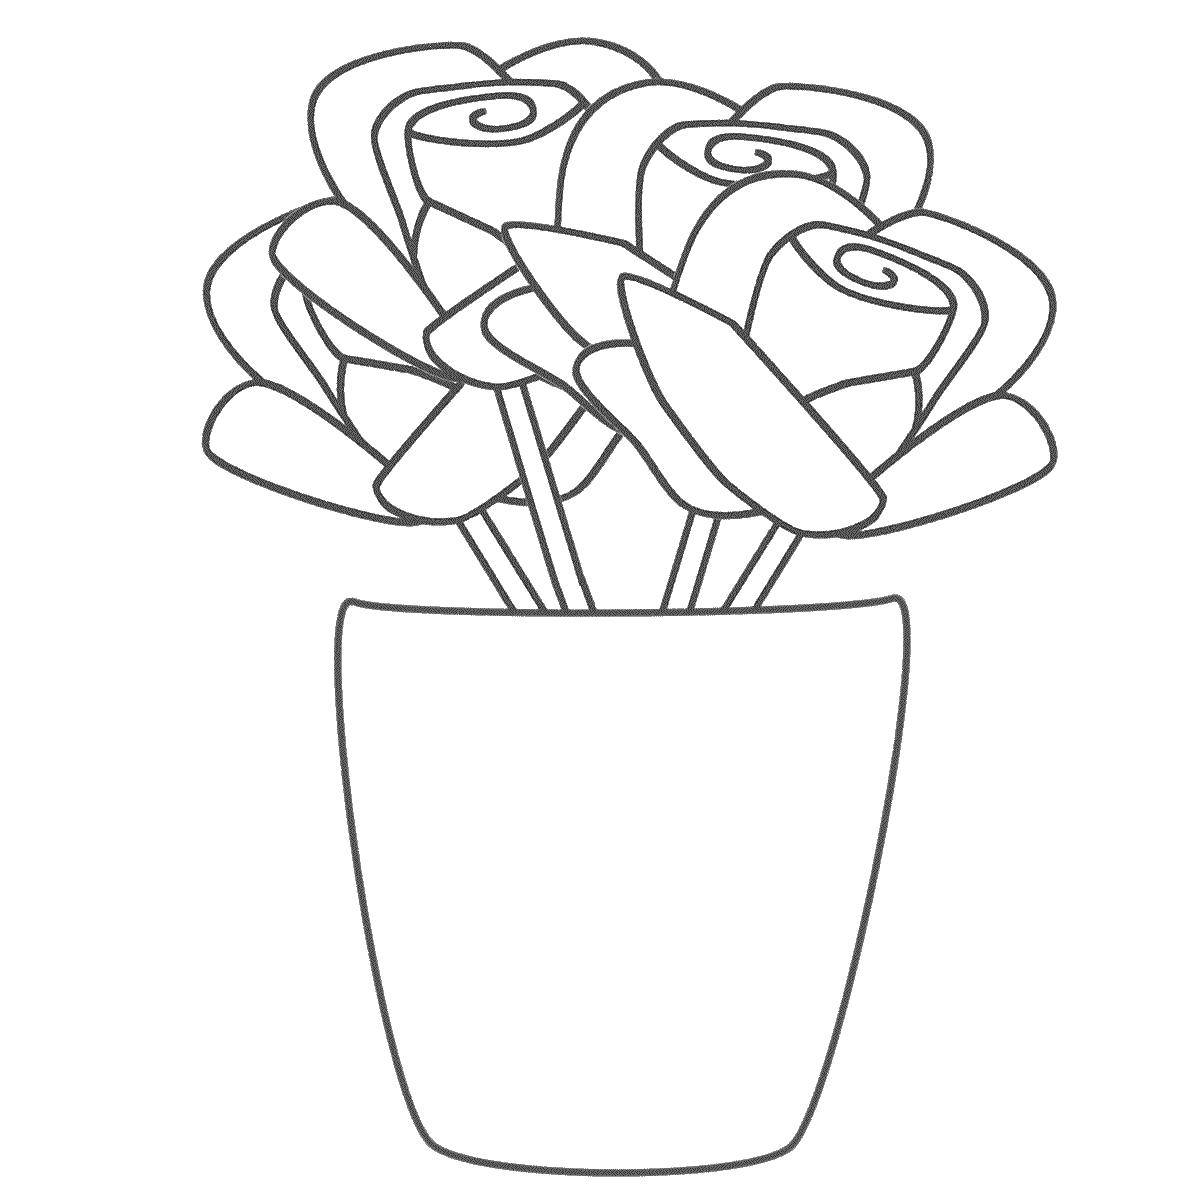 Coloring Roses in pot. Category Vase. Tags:  vase, pot, flowers.